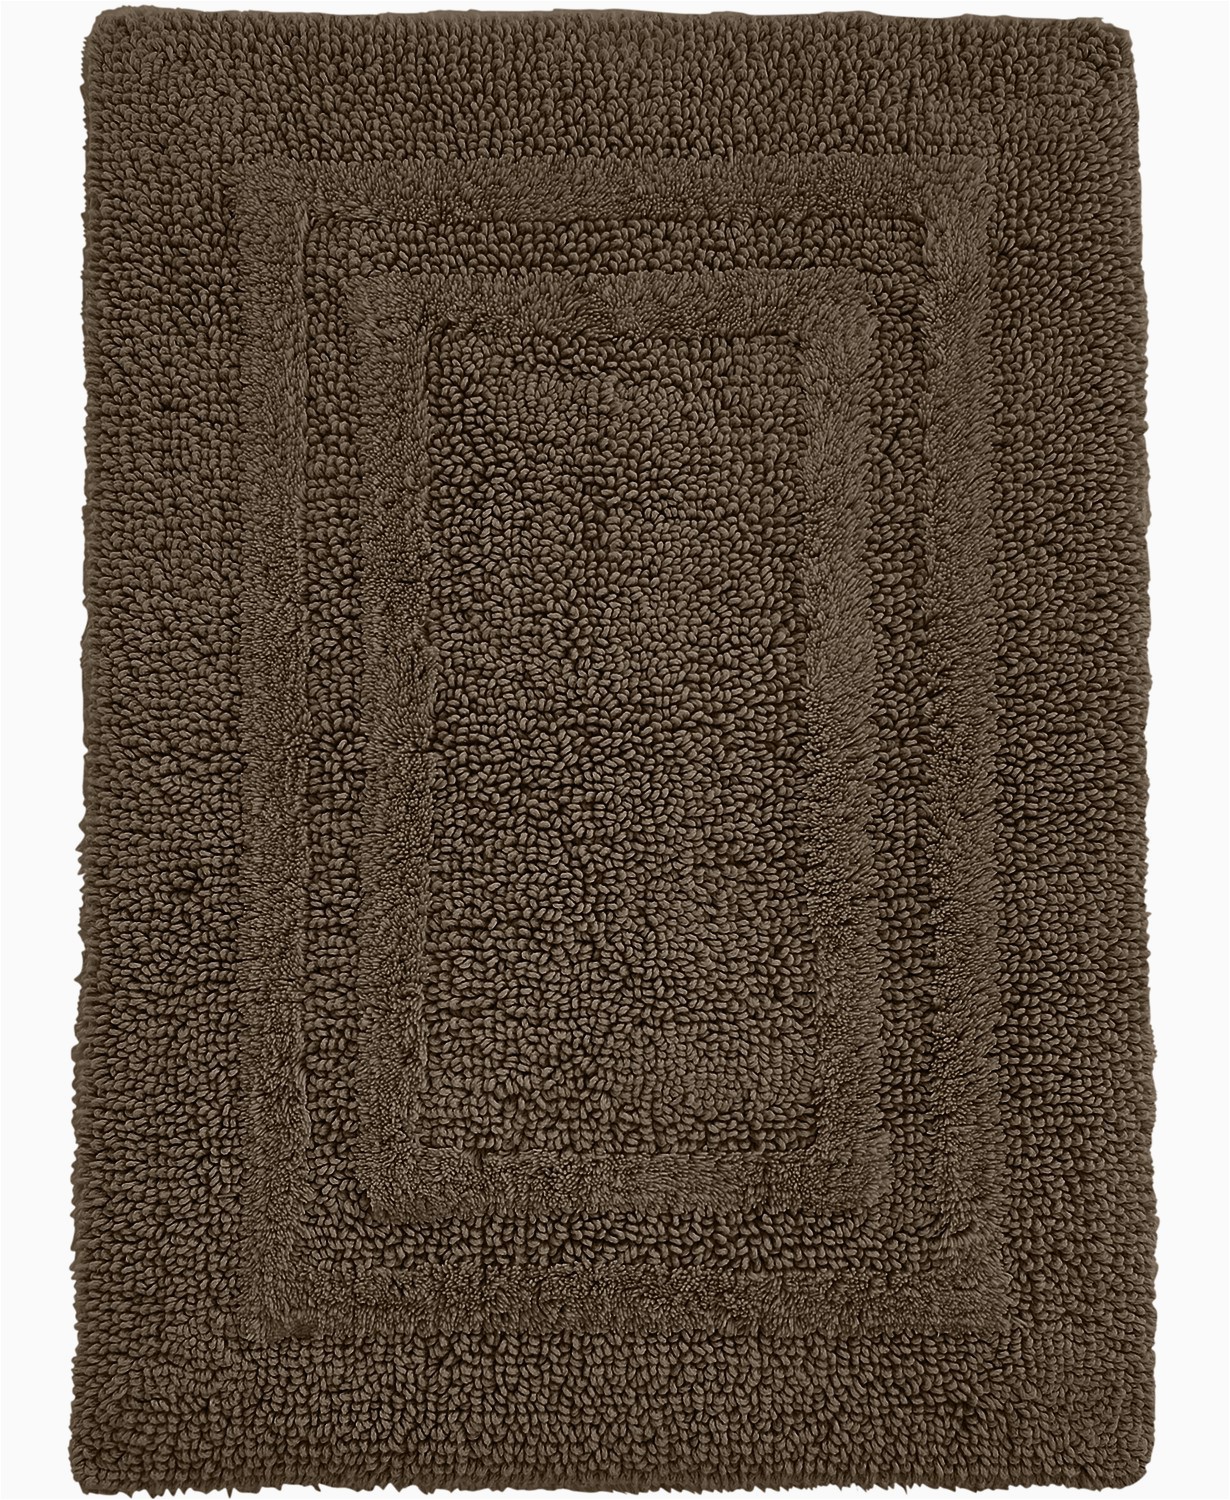 Reversible Bathroom Rugs Sets Hotel Collection Cotton Reversible 18 Inches X 25 Inches Bath Rug Pamper Your Feet with This Super soft Reversible Bath Rug Chocolate